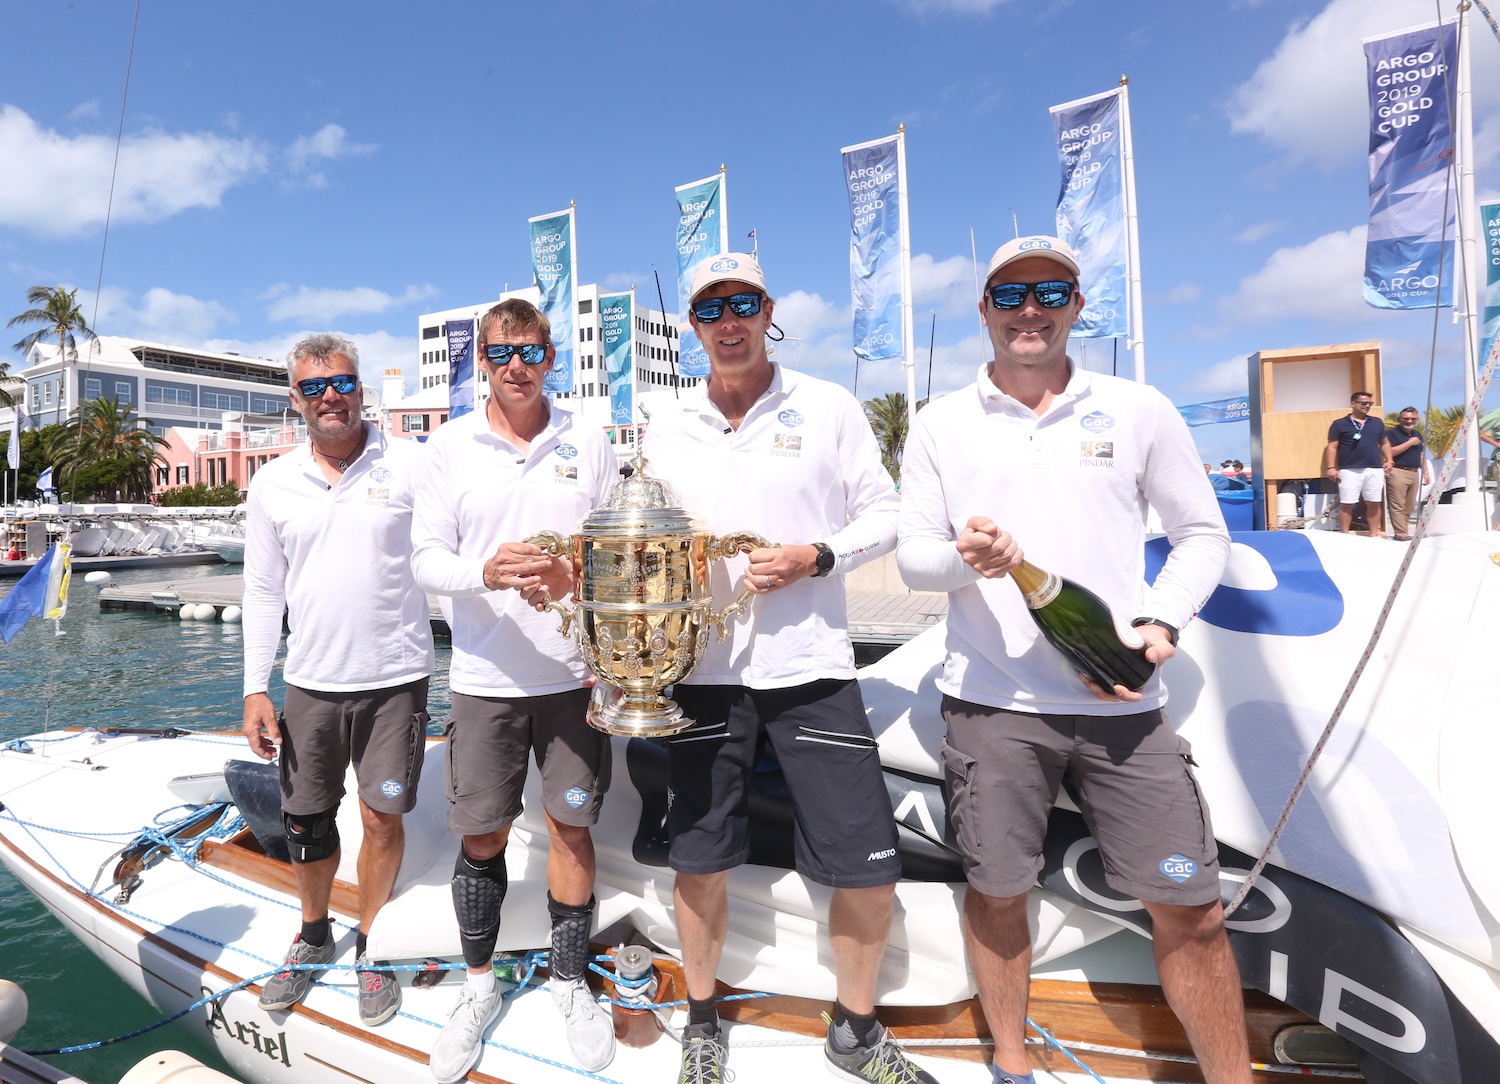 The Team GAC Pindar crew (from left) Gerry Mitchell, Richard Syndham, skipper Ian Williams and Tom Powrie, winners of the 69th Argo Group Gold Cup. Charles Anderson photo